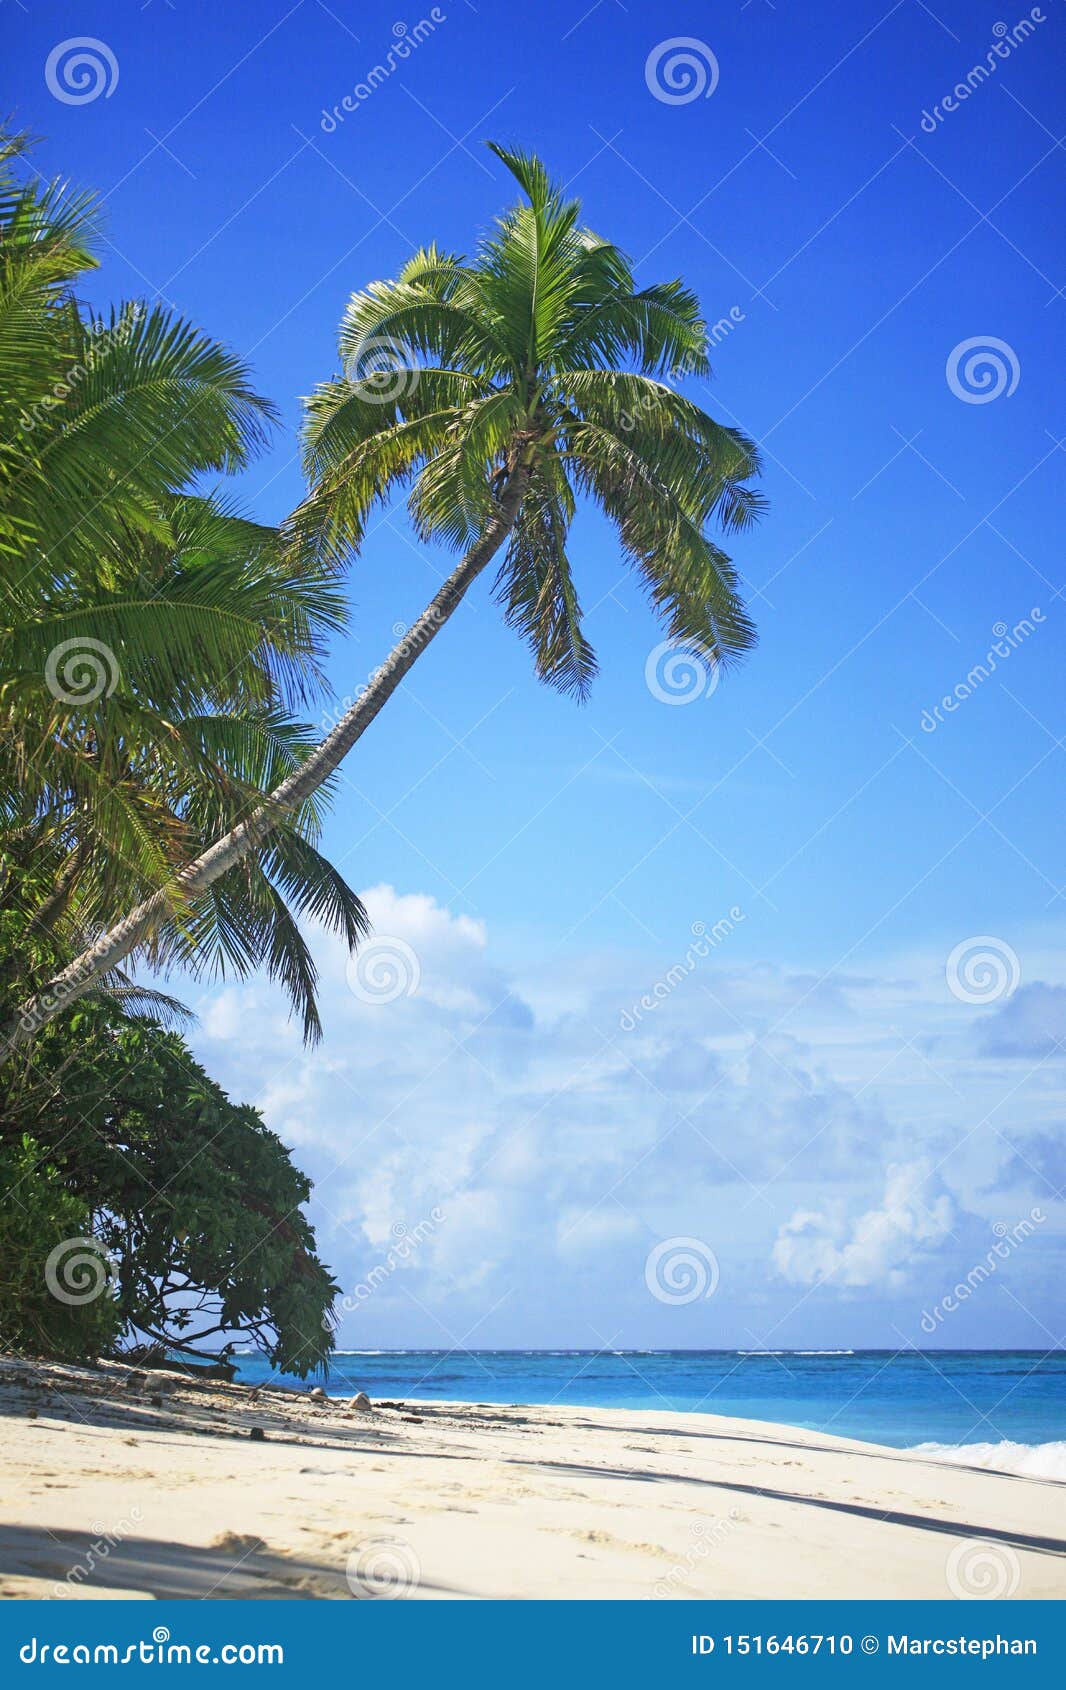 Tropical Island with a Paradise Beach and Palm Trees Stock Photo ...